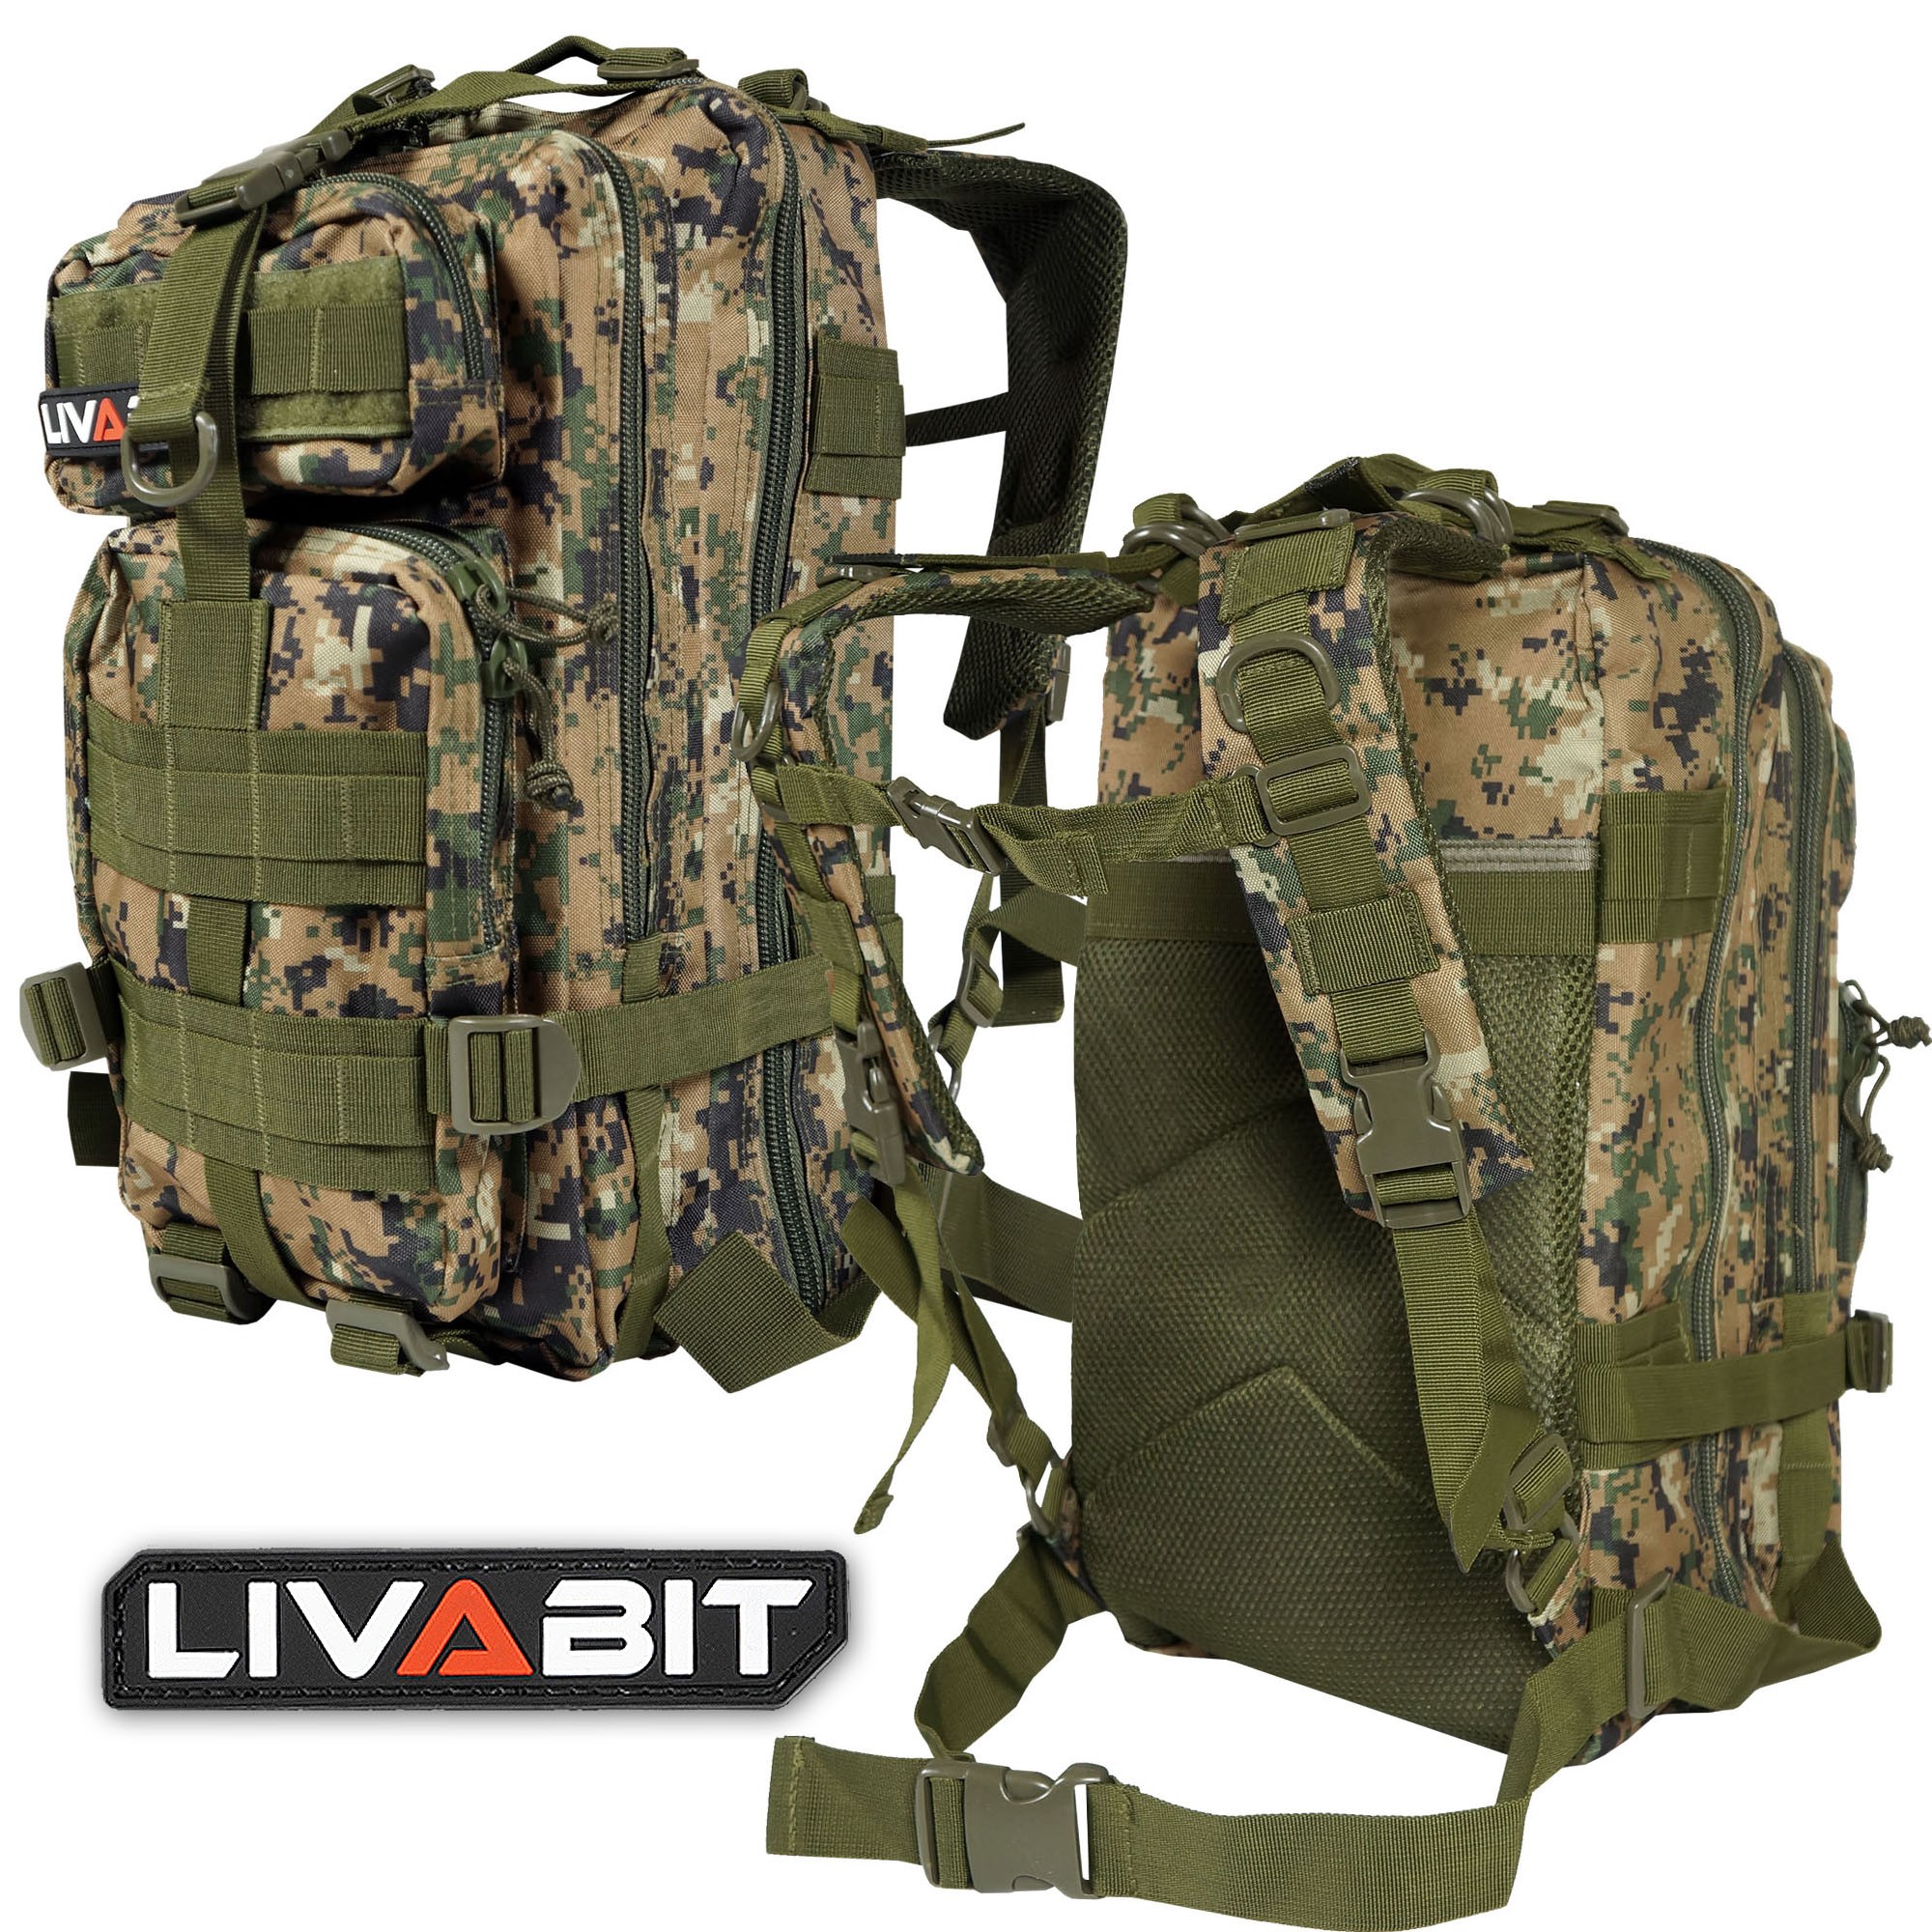 Heavy Duty Digital Camo Tactical Backpack Day Pack Water Resistant Bug Out Bag 